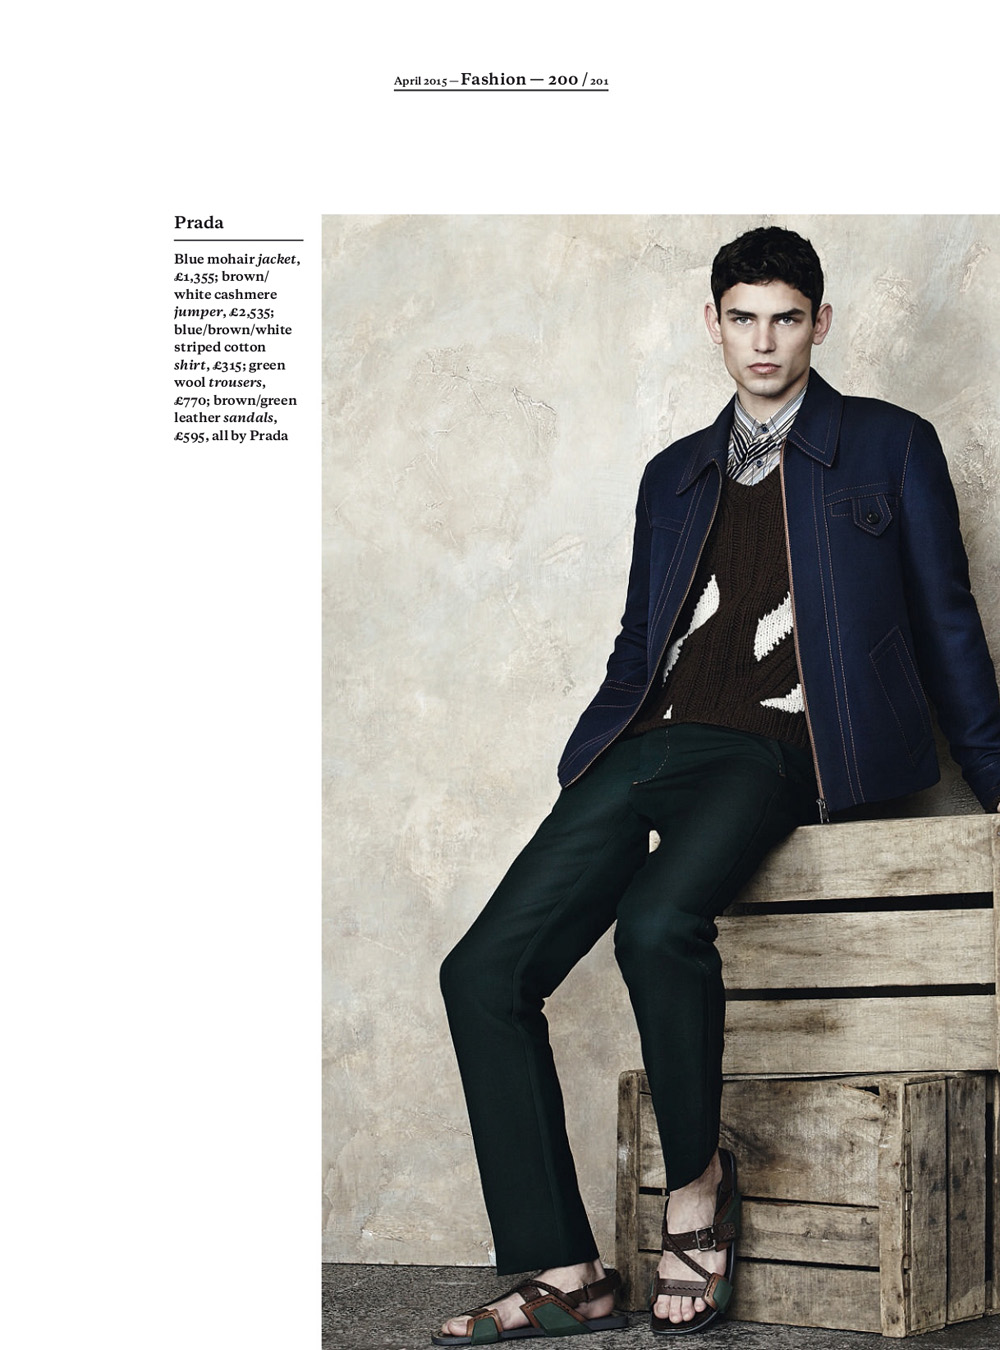 Esquire UK April 2015: The New Casual - Fashionably Male